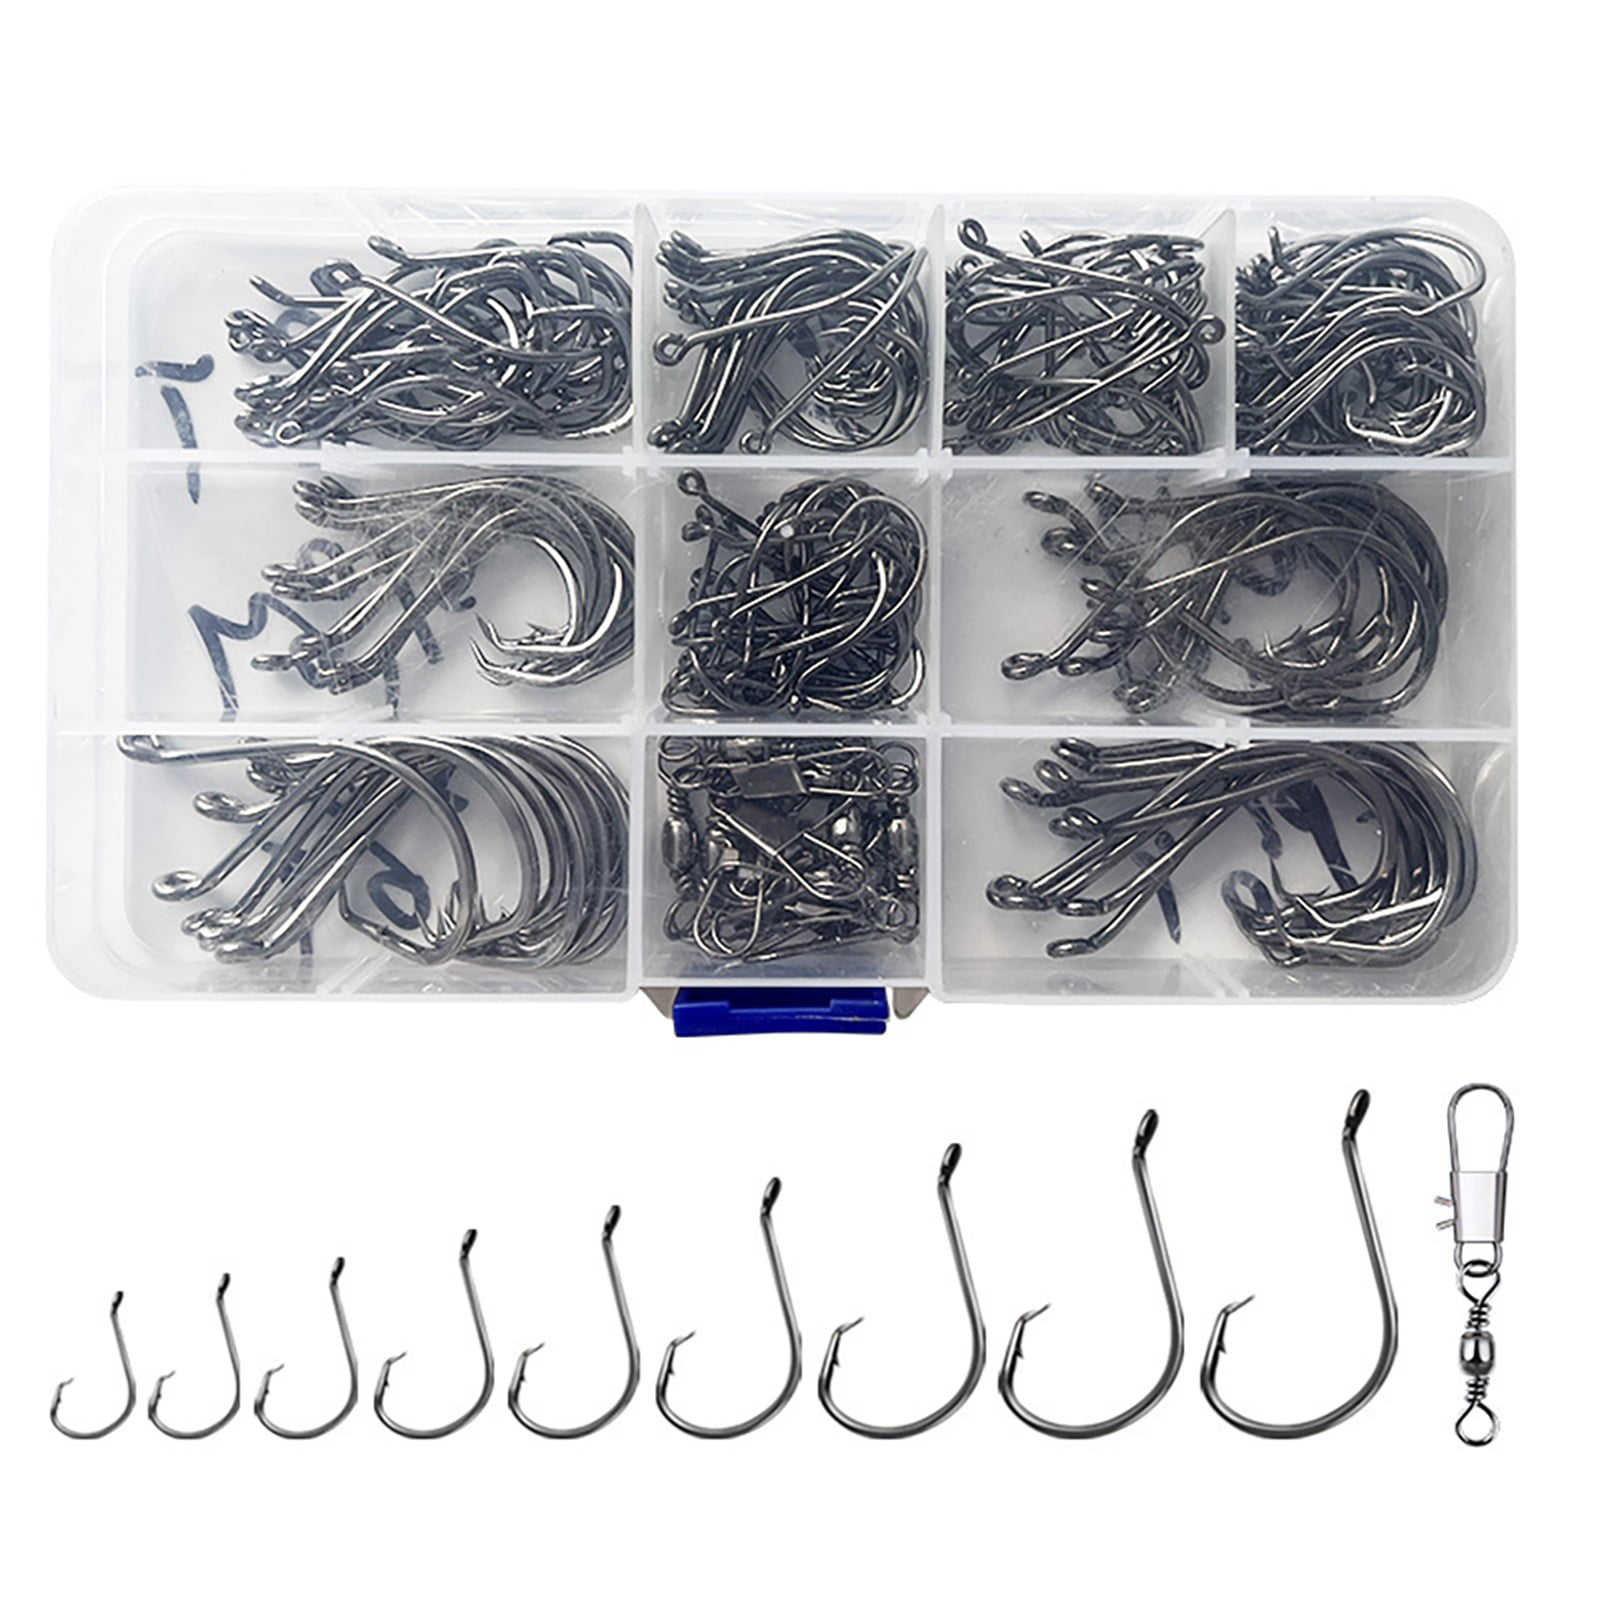 170 sets of 7384 high carbon steel octopus hooks with barbed hooks